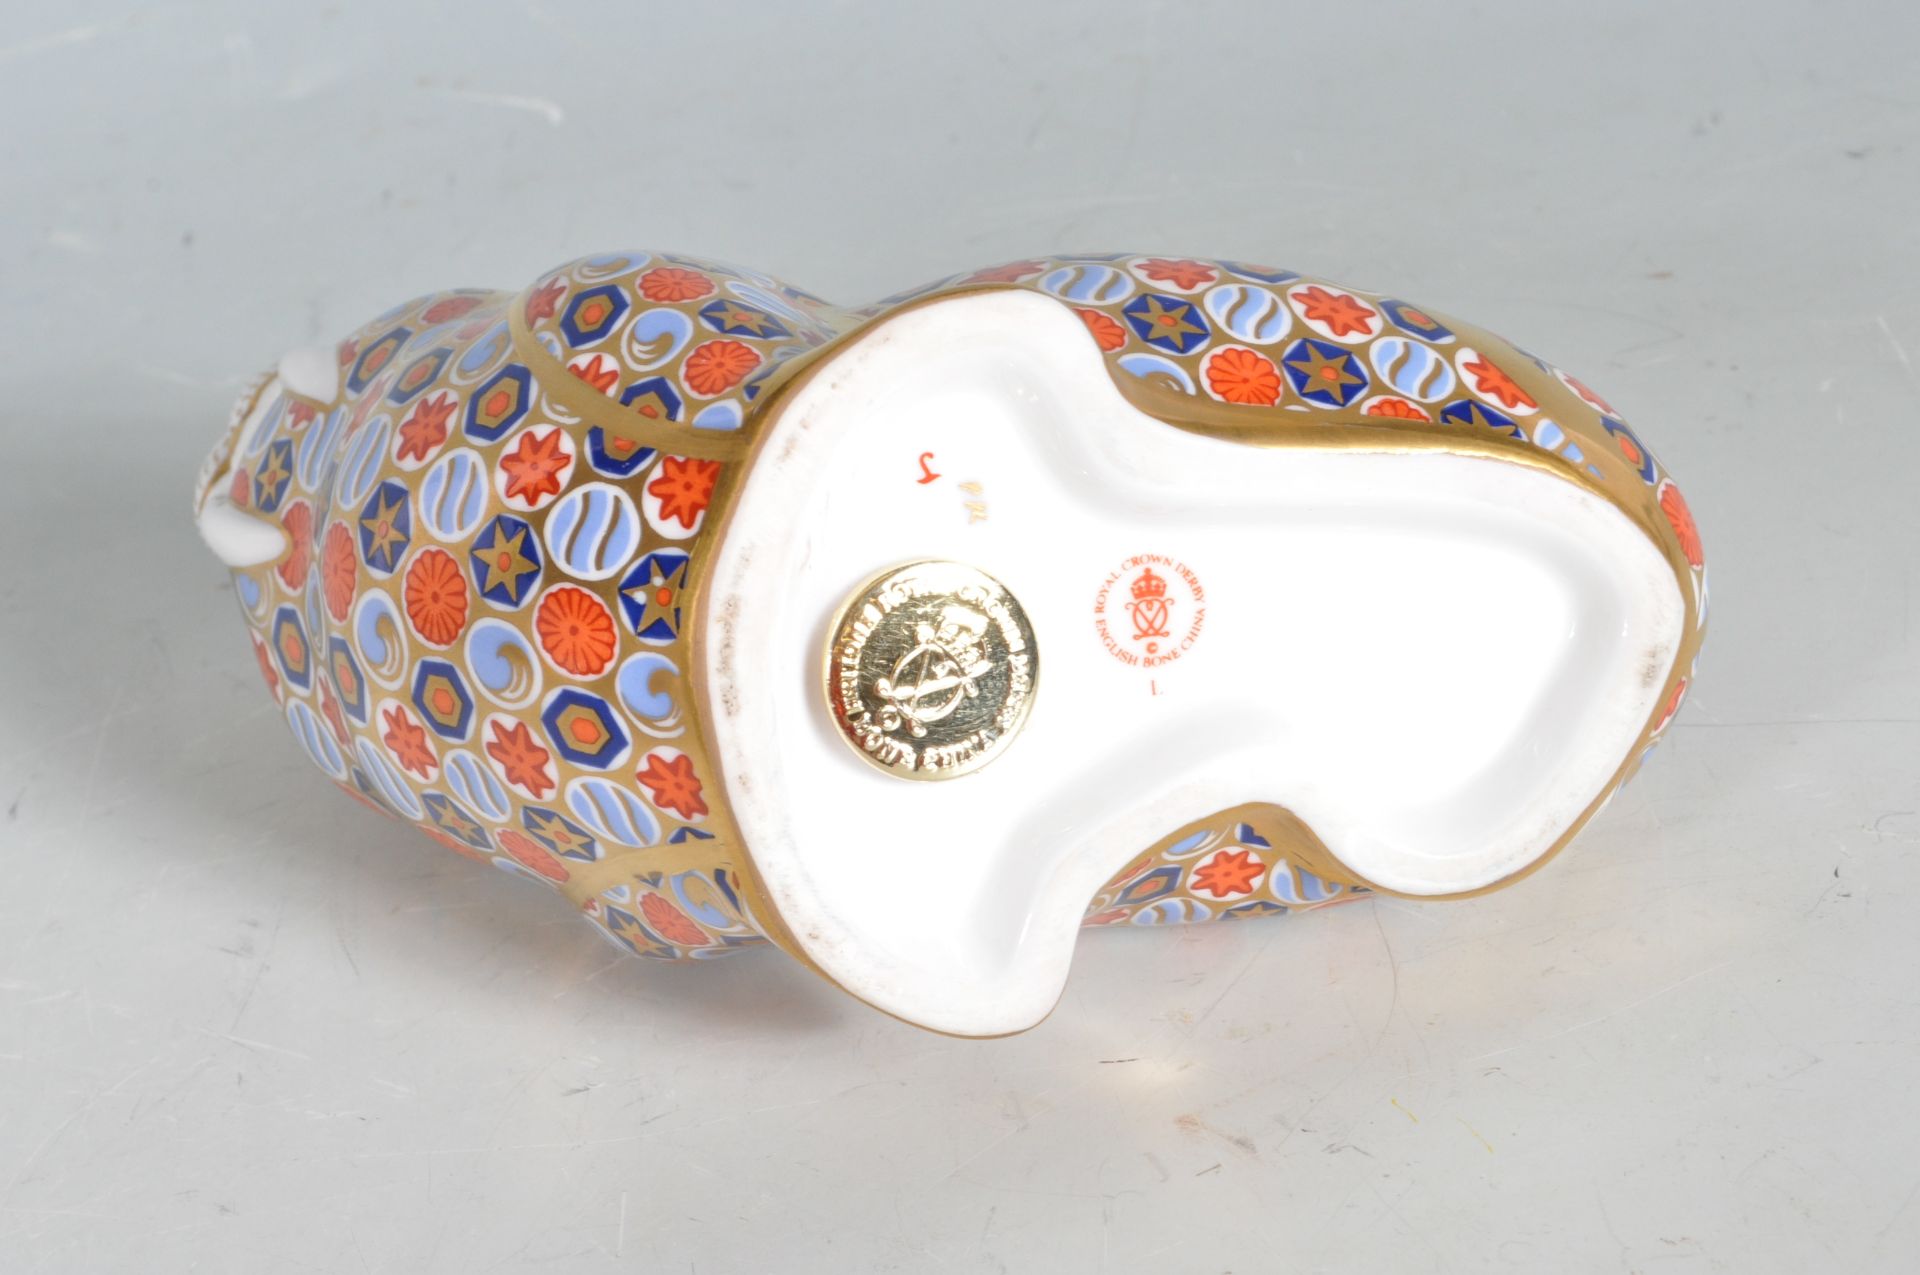 ROYAL CROWN DERBY WALRUS PAPERWEIGHT FIGURINE - Image 6 of 6